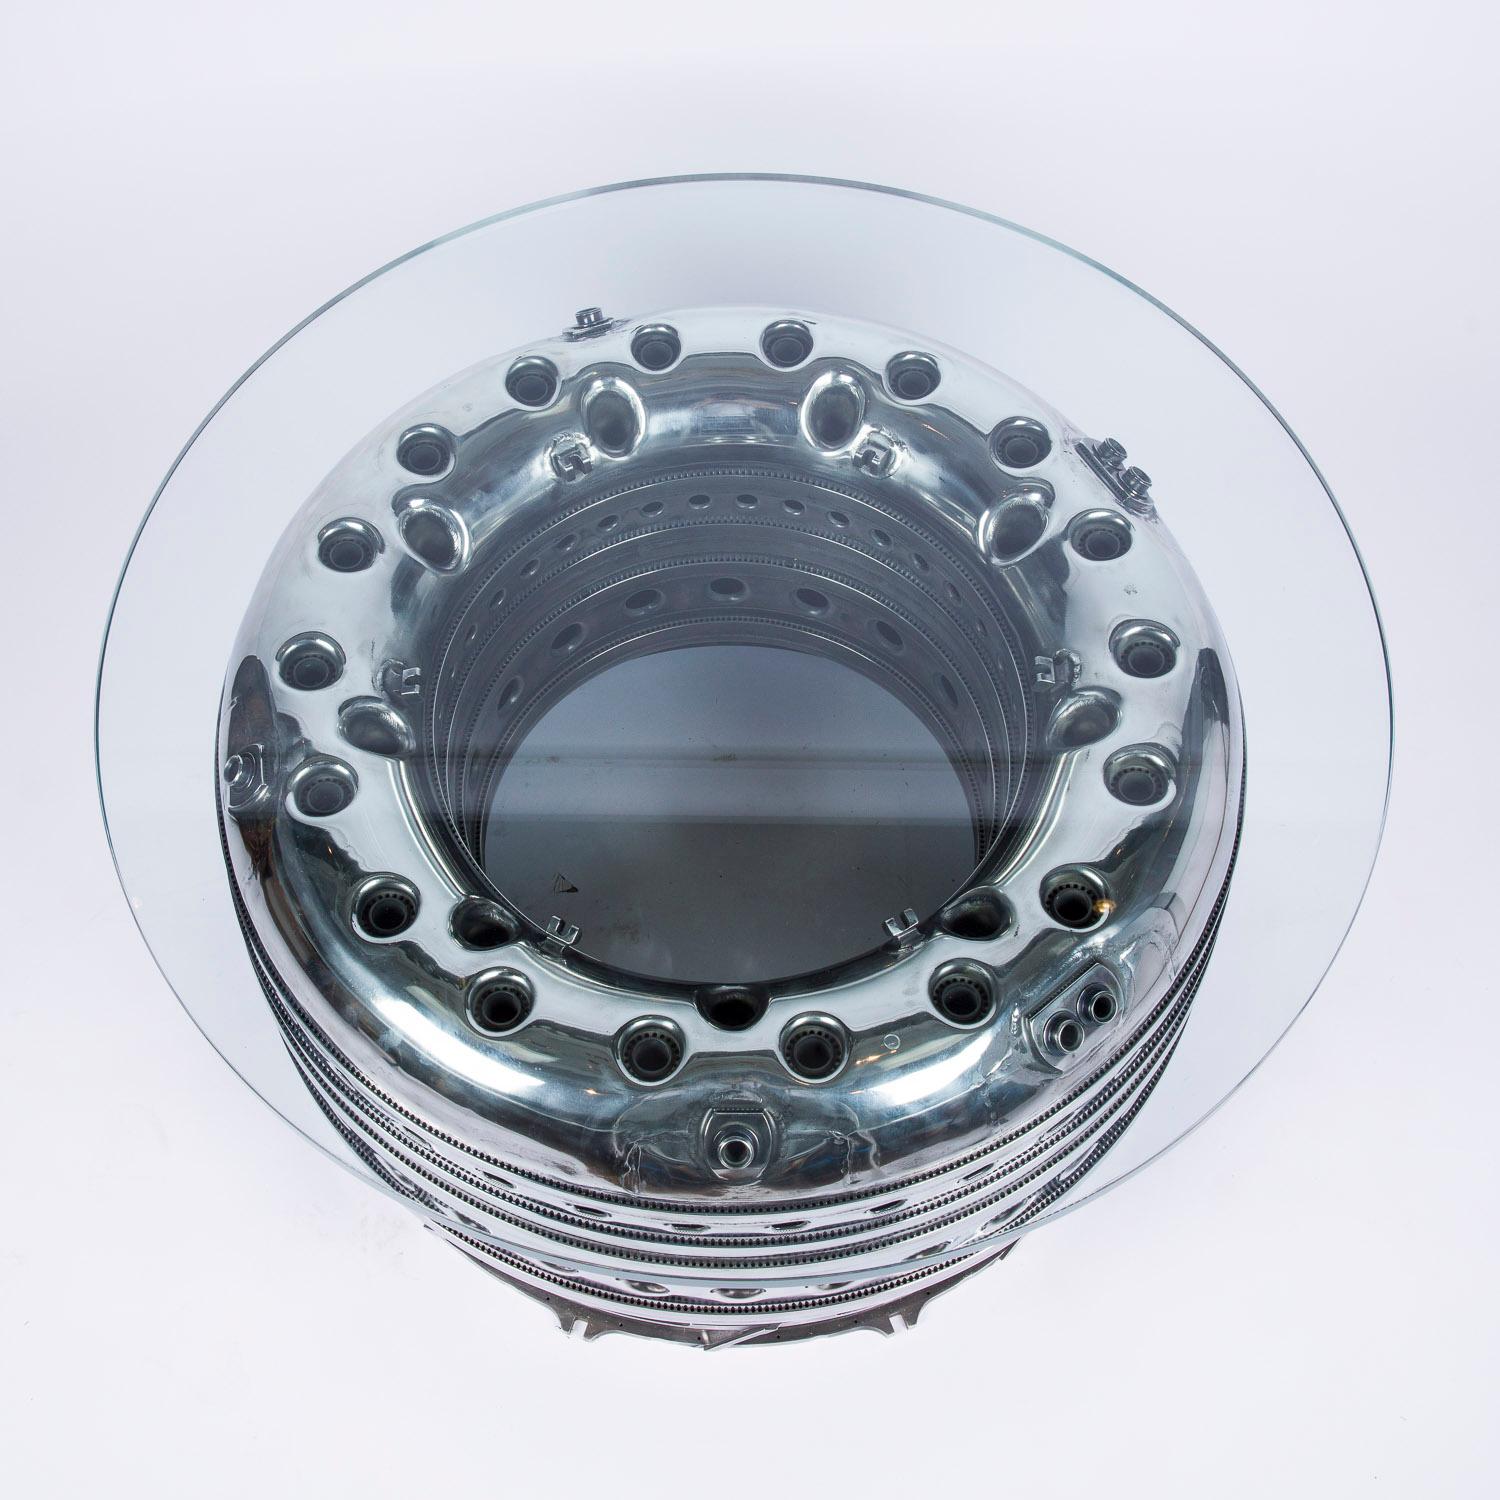 A Rolls Royce Pegasus jet engine annular ASM combustor chamber table, with 18 mm toughened glass top.


The unique Pegasus engine powers all versions of the Harrier family of multi-role military aircraft. 

The Rolls-Royce Pegasus is a turbofan